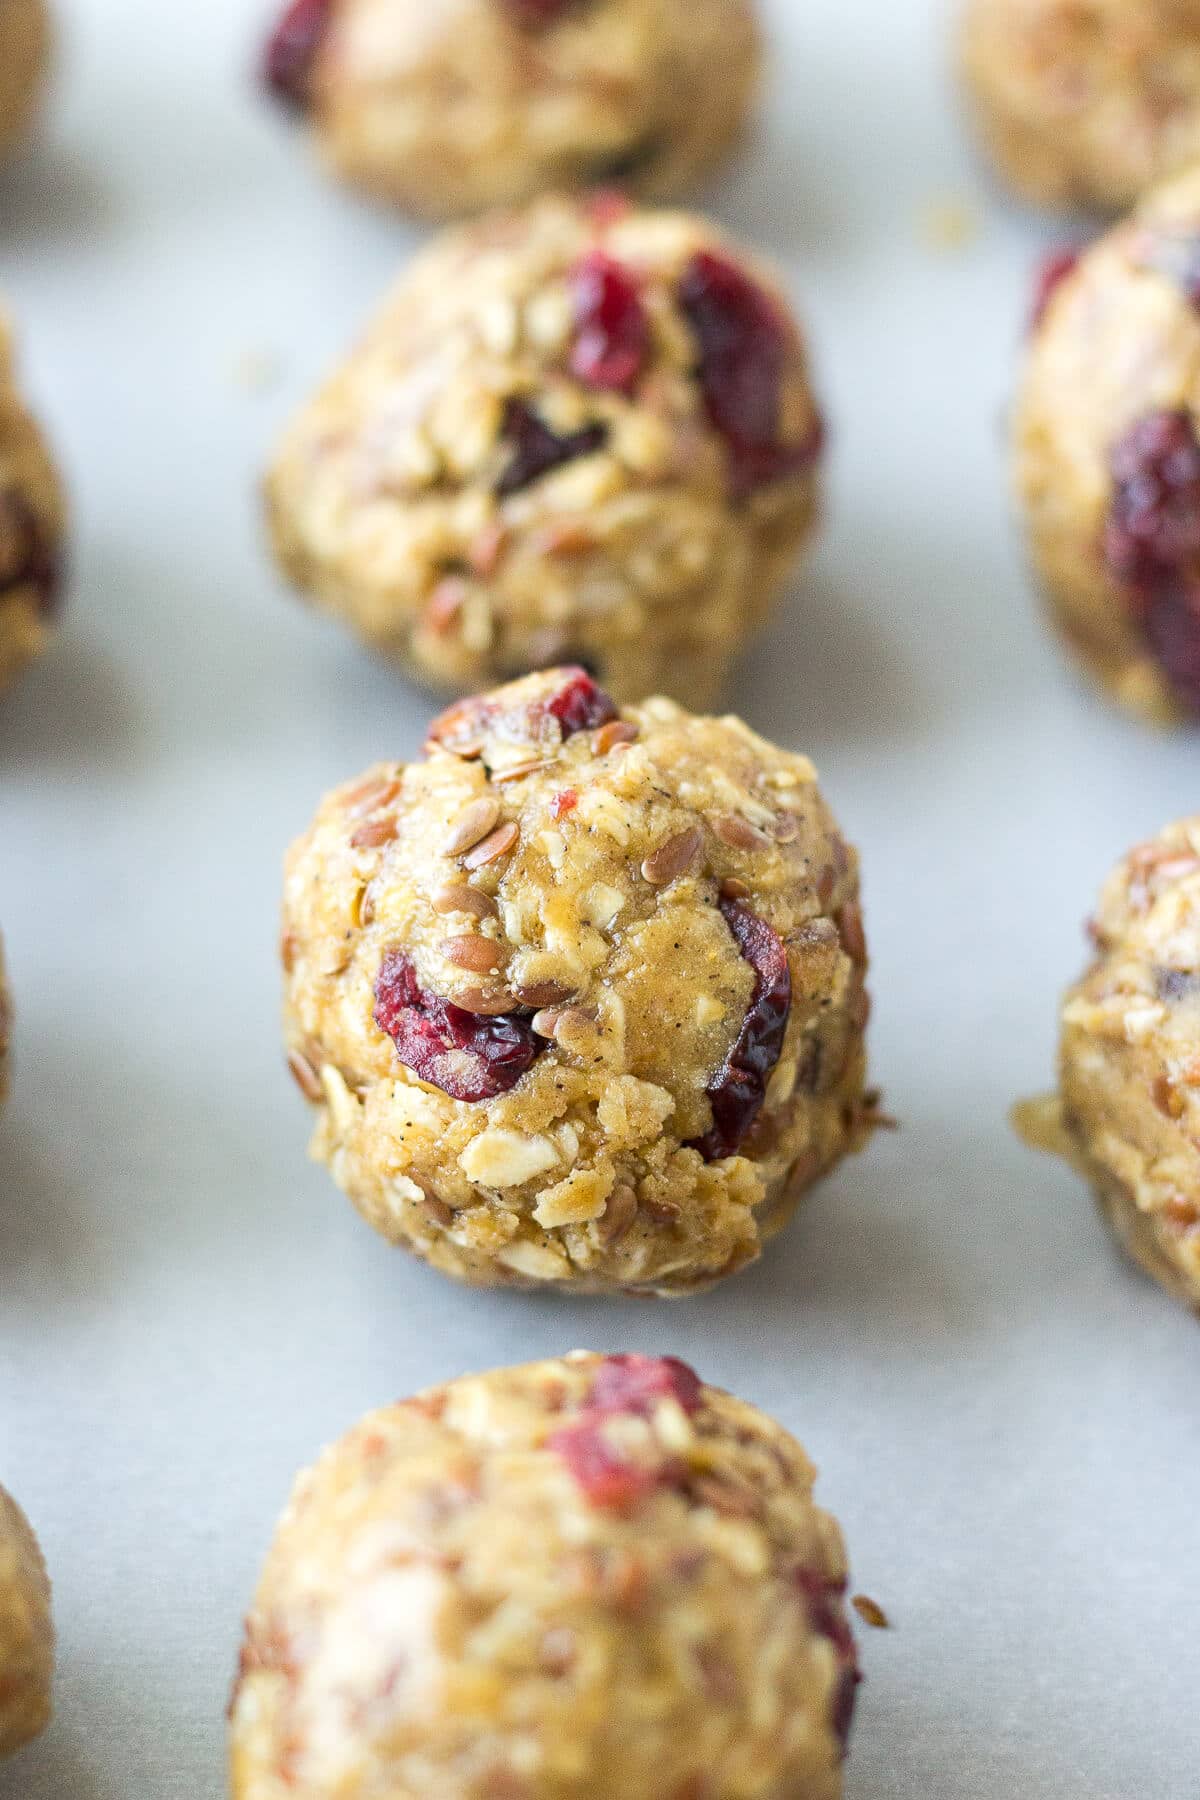 These PB & J Protein Balls are going to be your new favorite bite-sized snack! They're made with all healthy ingredients and packed with protein for a filling snack on-the-go.